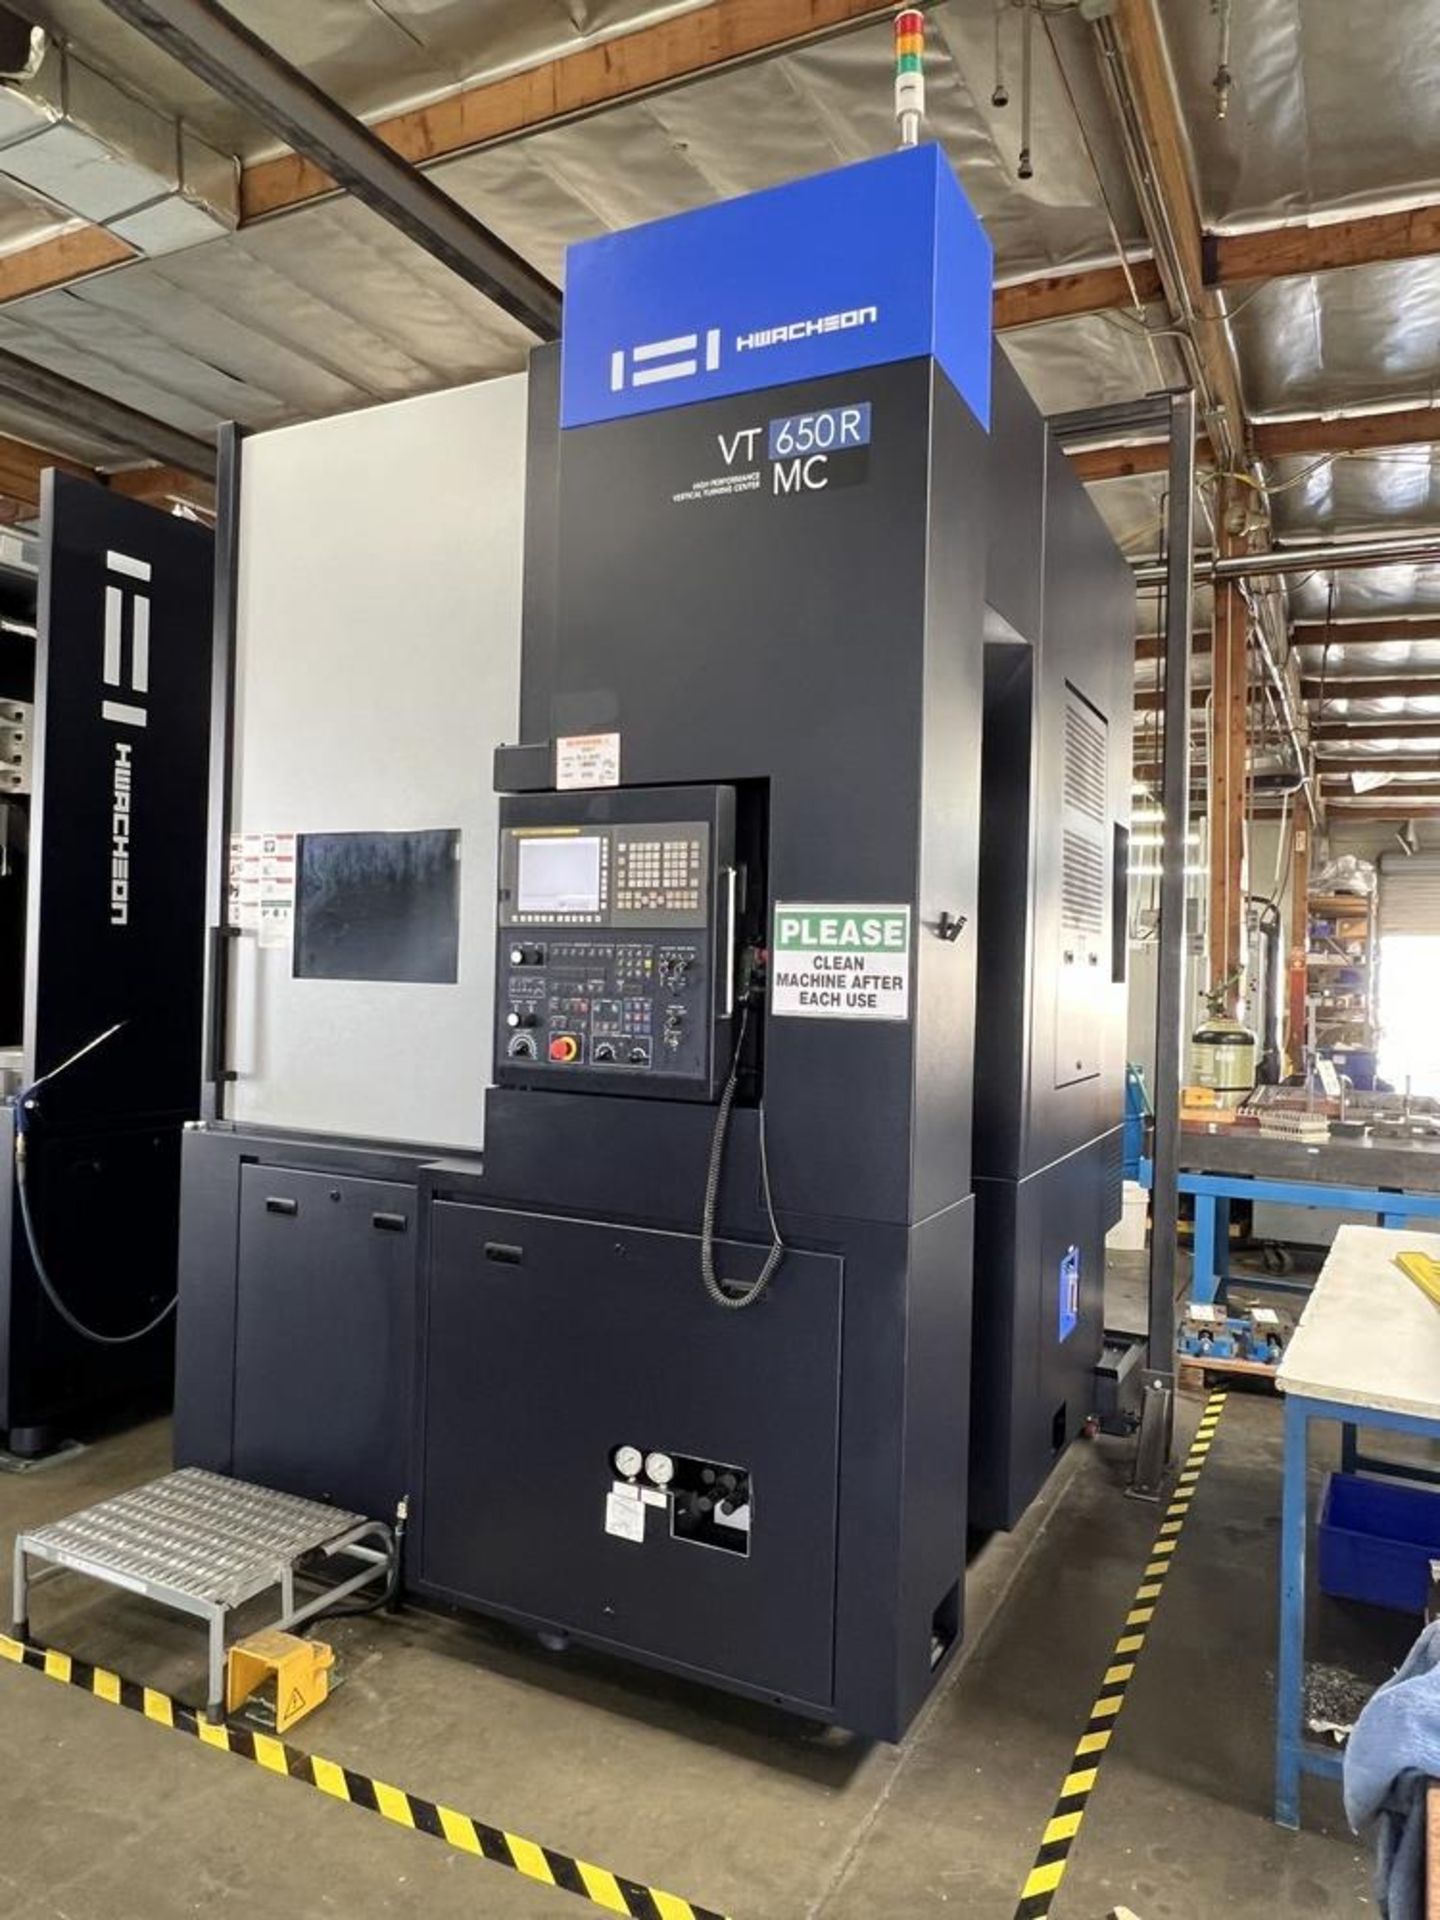 2020 Hwacheon VT-650R MC, 1500 RPM, 24" Chuck, 12 Station Turret, Live Milling, 35" Max Swing, - Image 3 of 32